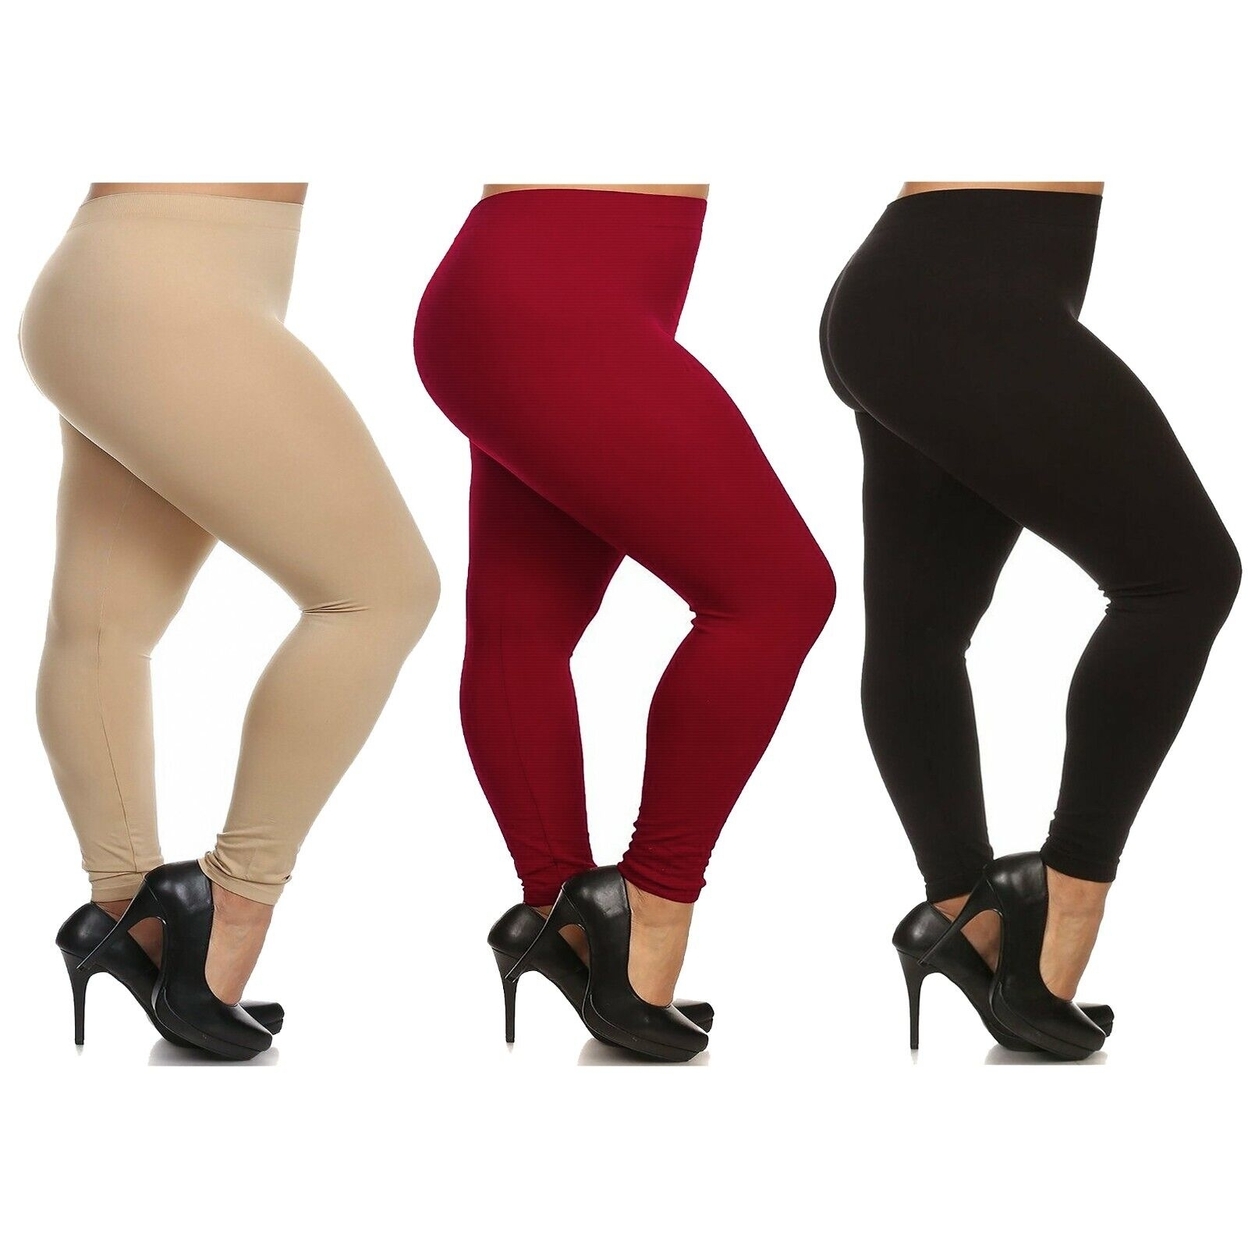 3-Pack: Women's Casual Ultra-Soft Smooth High Waisted Athletic Active Yoga Leggings Plus Size Available - Black,black,black, 2x